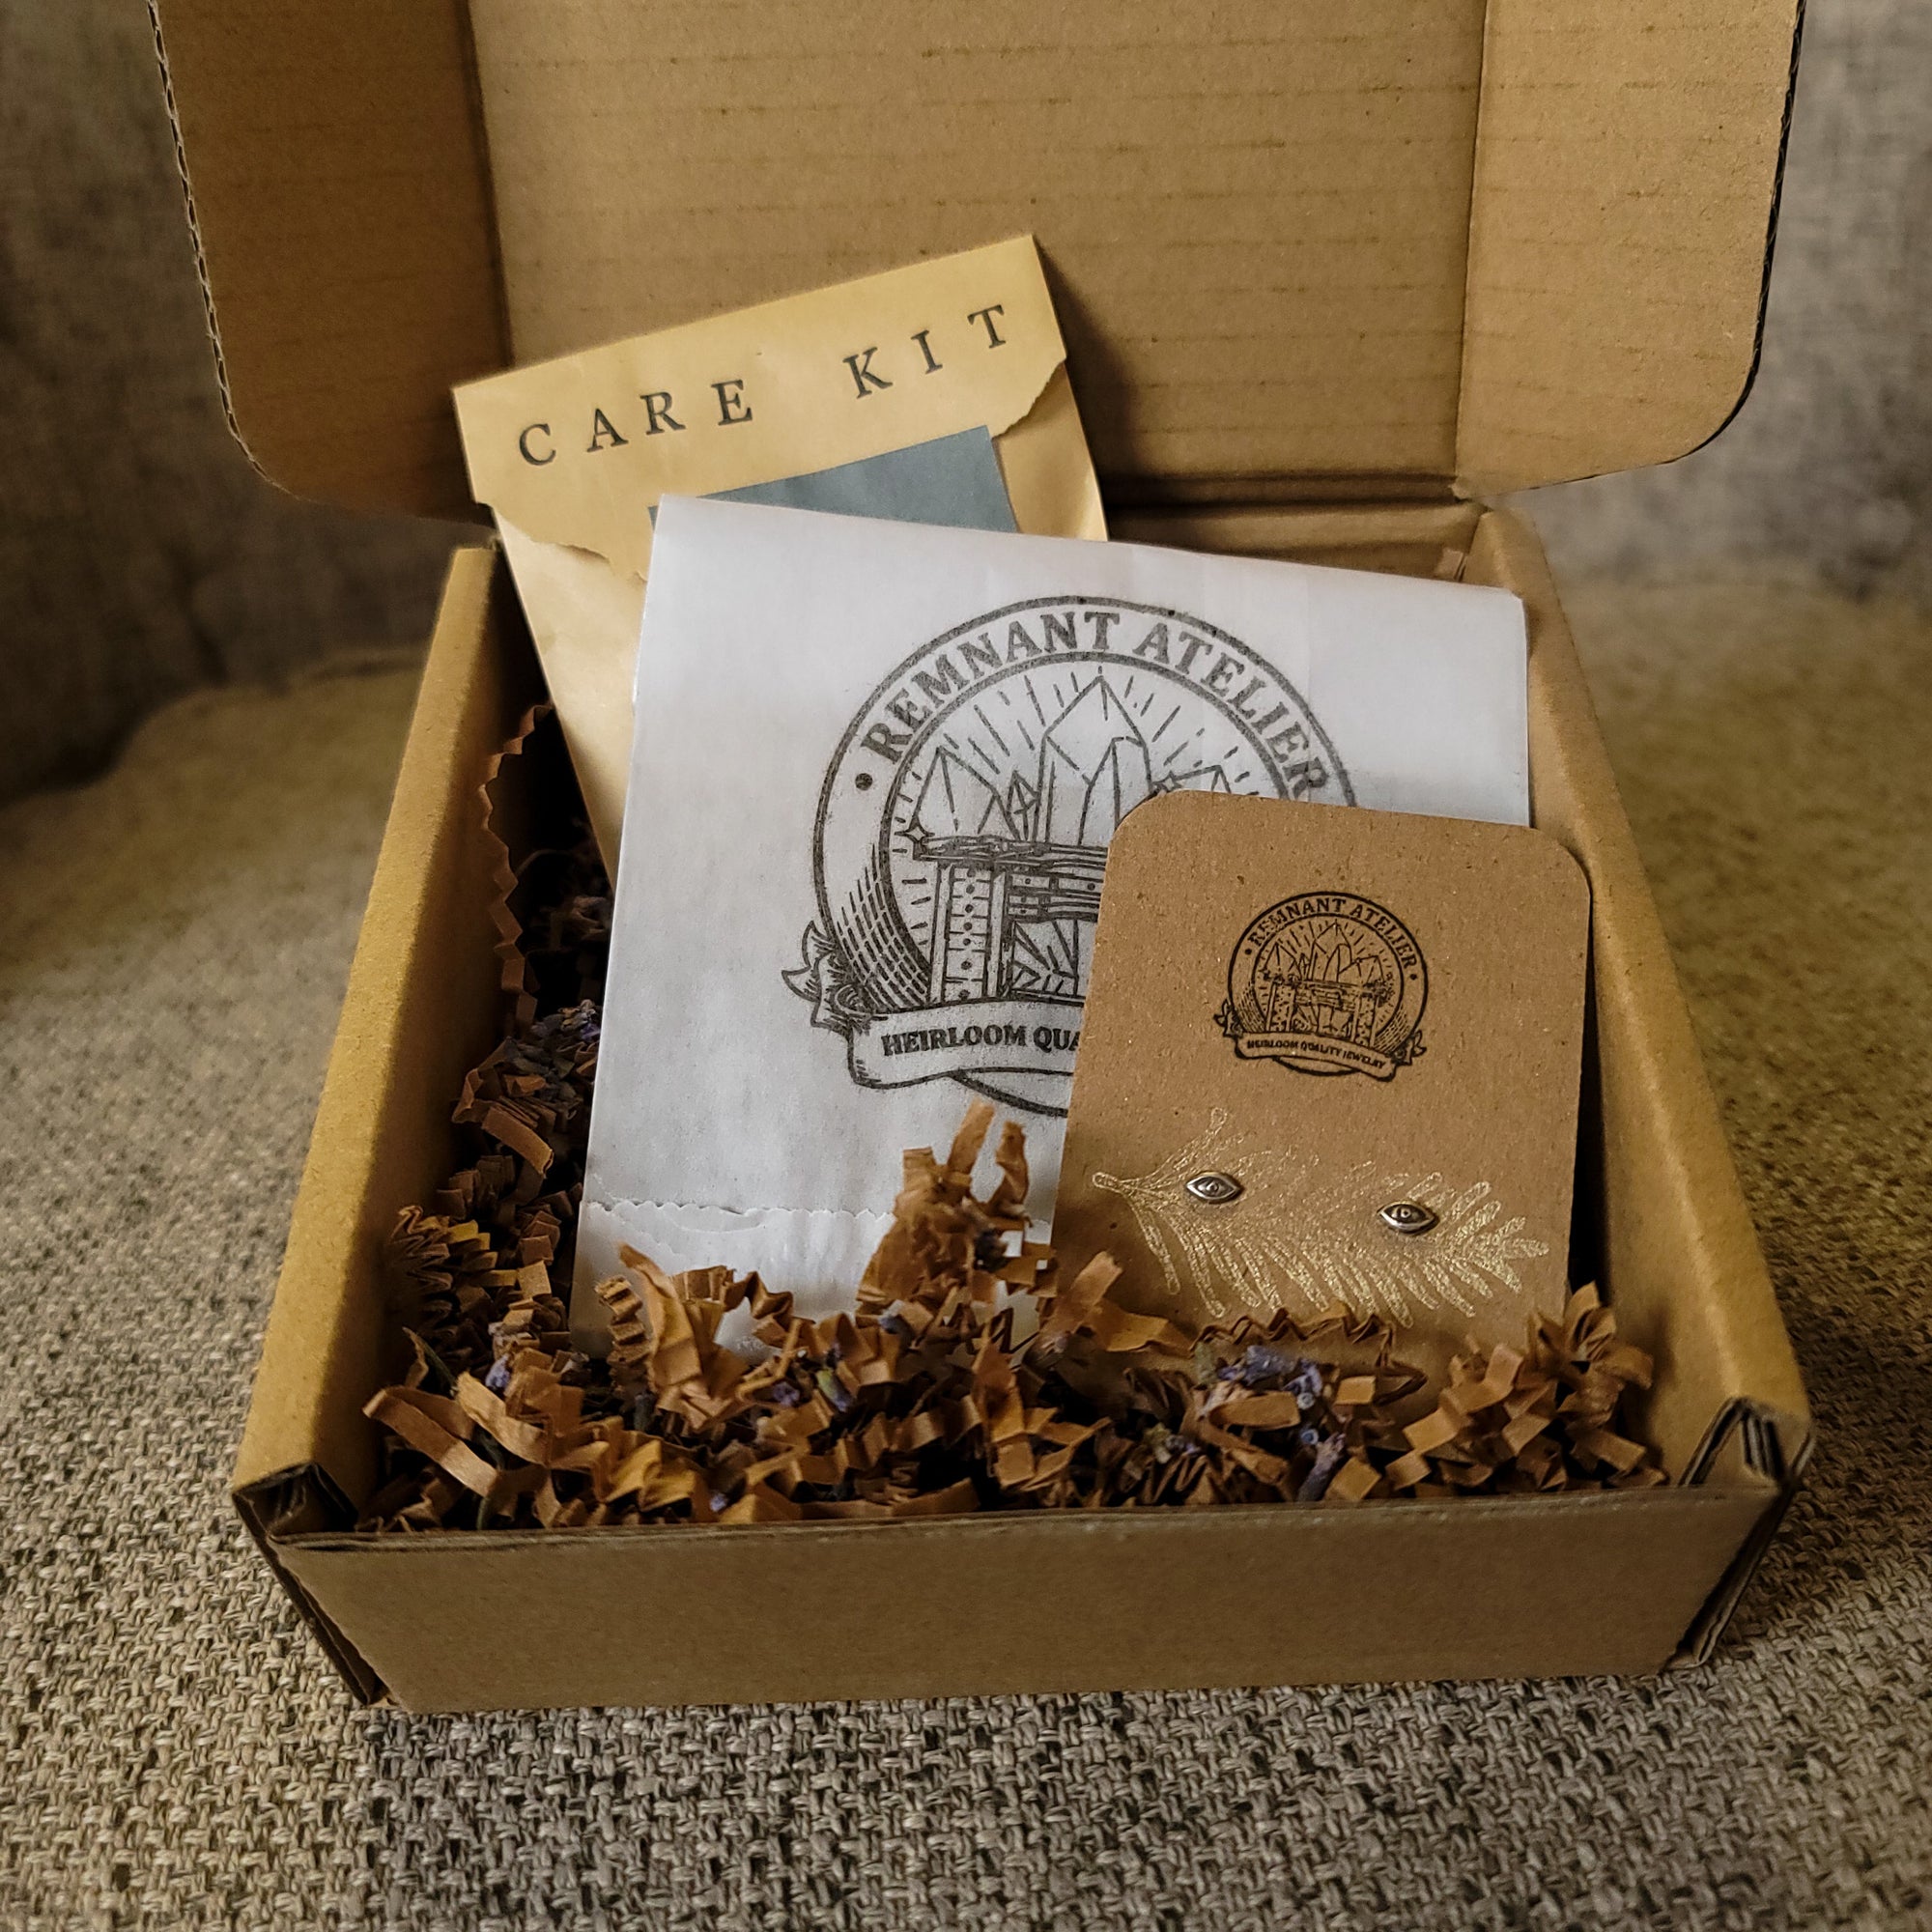 This photo shows a pair of handmade sterling silver eyes shaped stud earrings displayed on a cardboard earring card inside a cardboard box, surrounded by shredded cardboard. The package also includes a care kit to keep the jewelry in top condition.